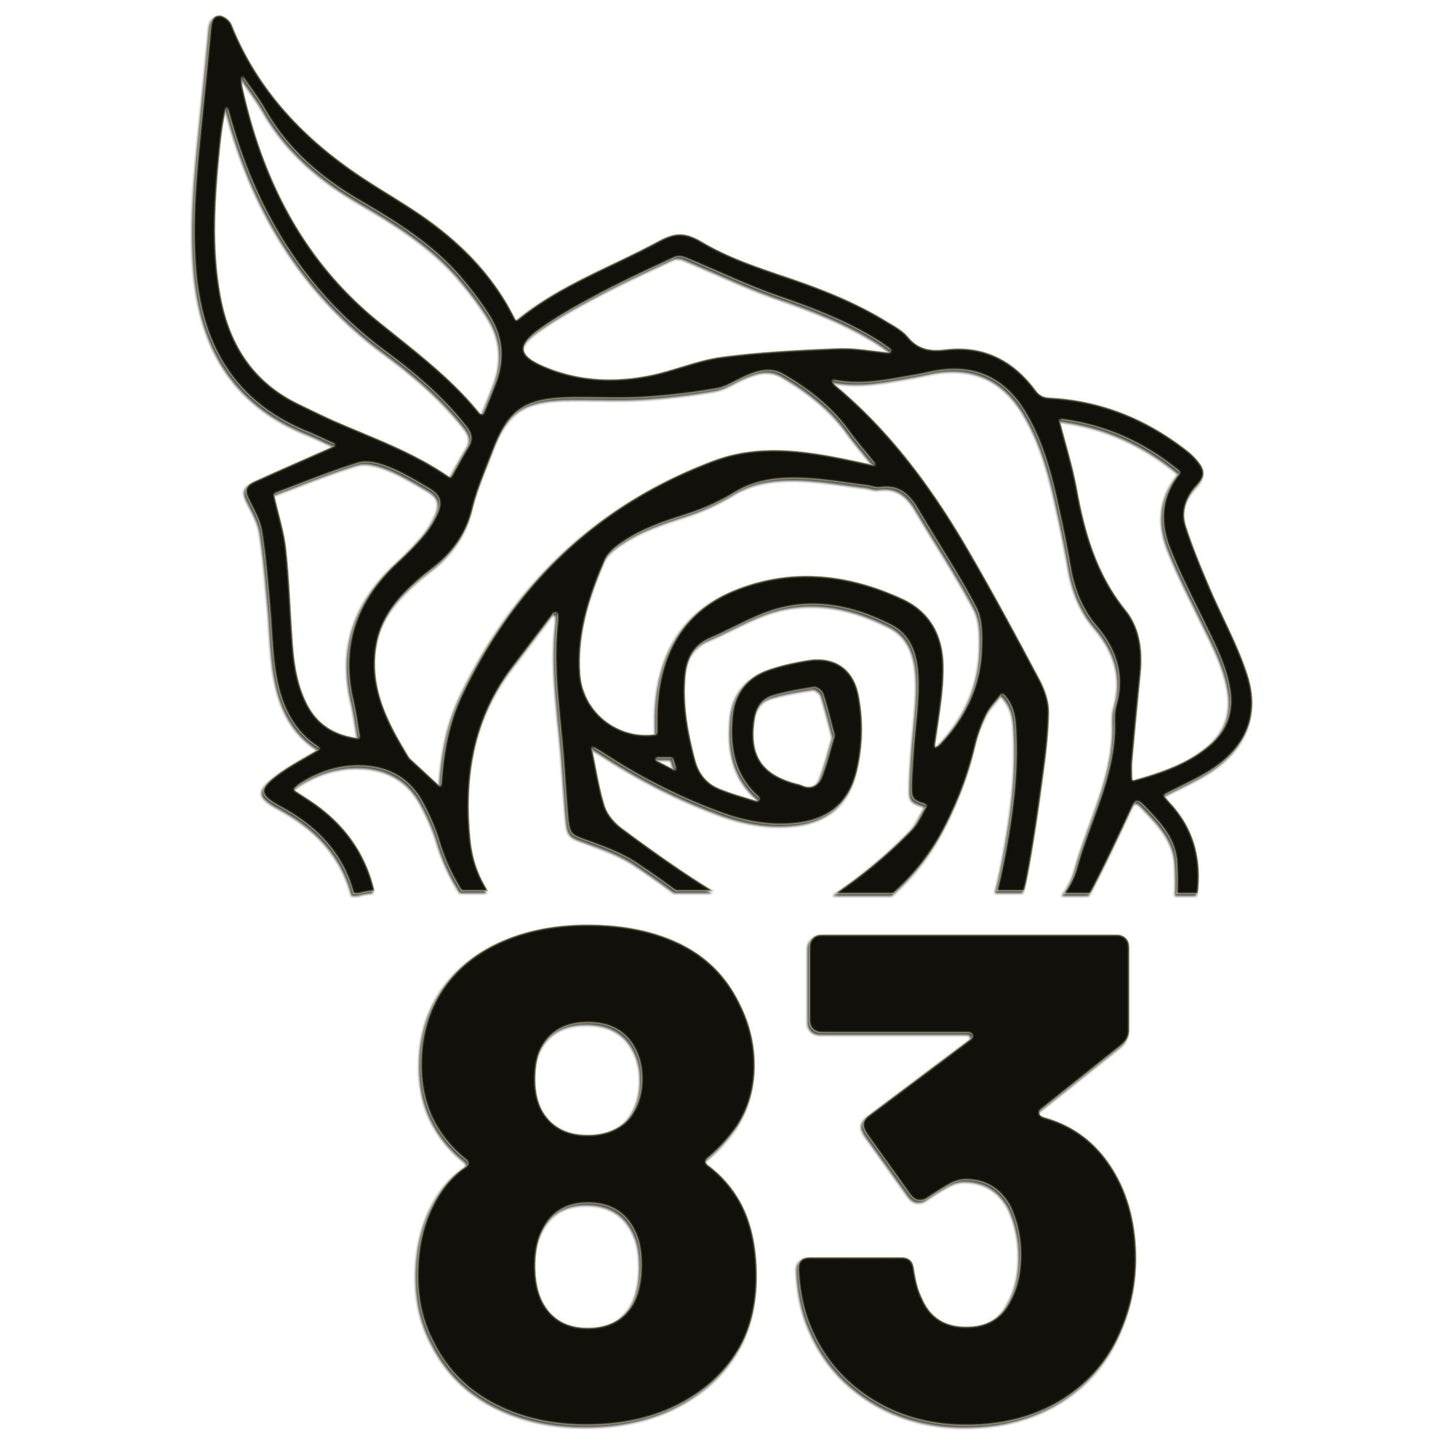 Wheelie Bin Caddy Recycle Home Decor Rose House Number Sticker Label